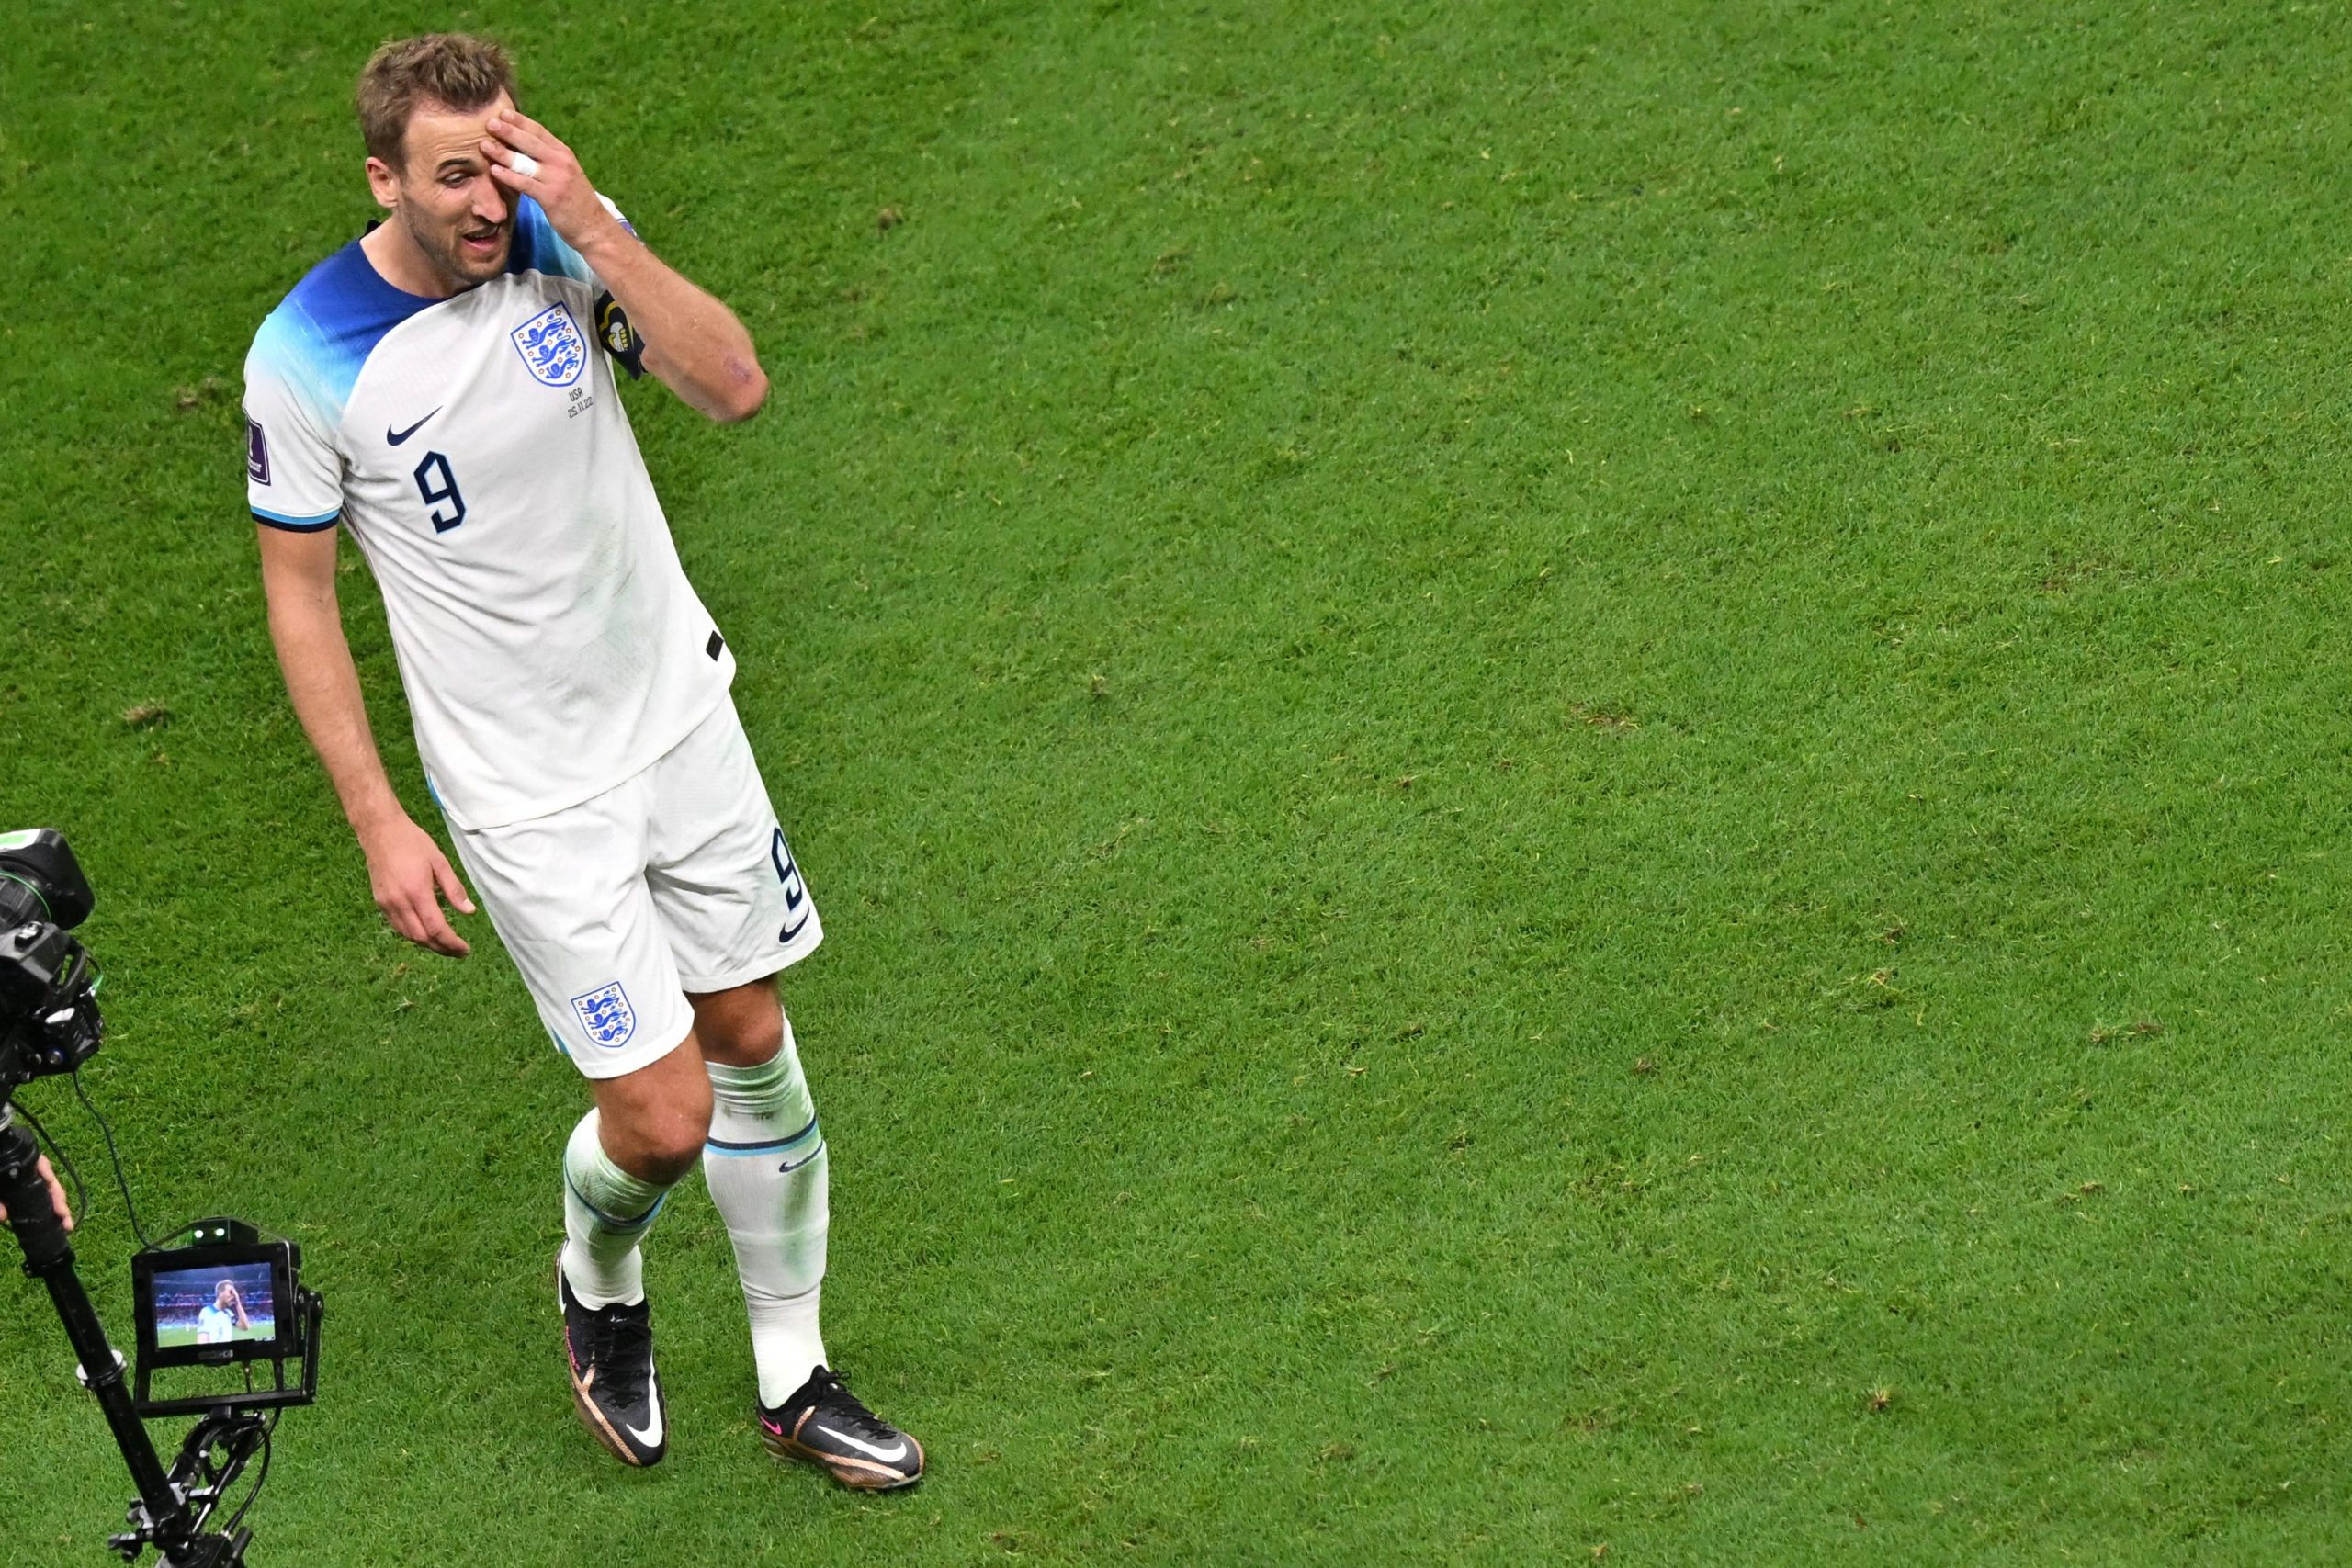 Tottenham Hotspur forward Harry Kane afforded a week off by the club following World Cup exit.